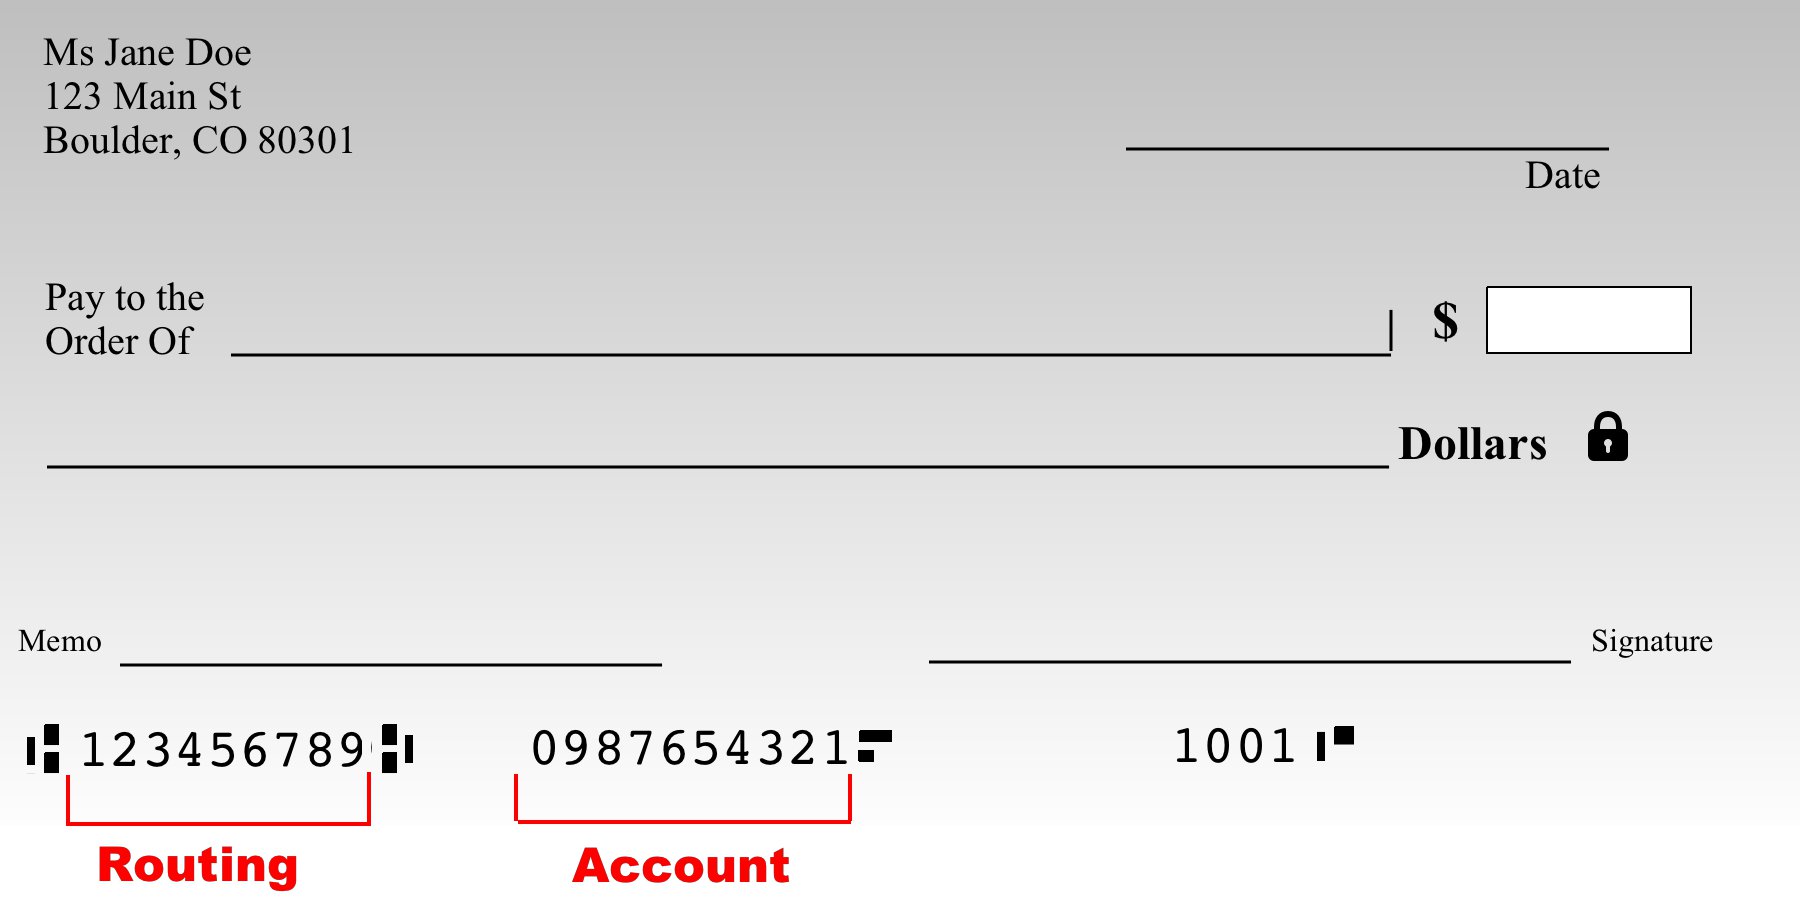 You can see the routing number on your check 